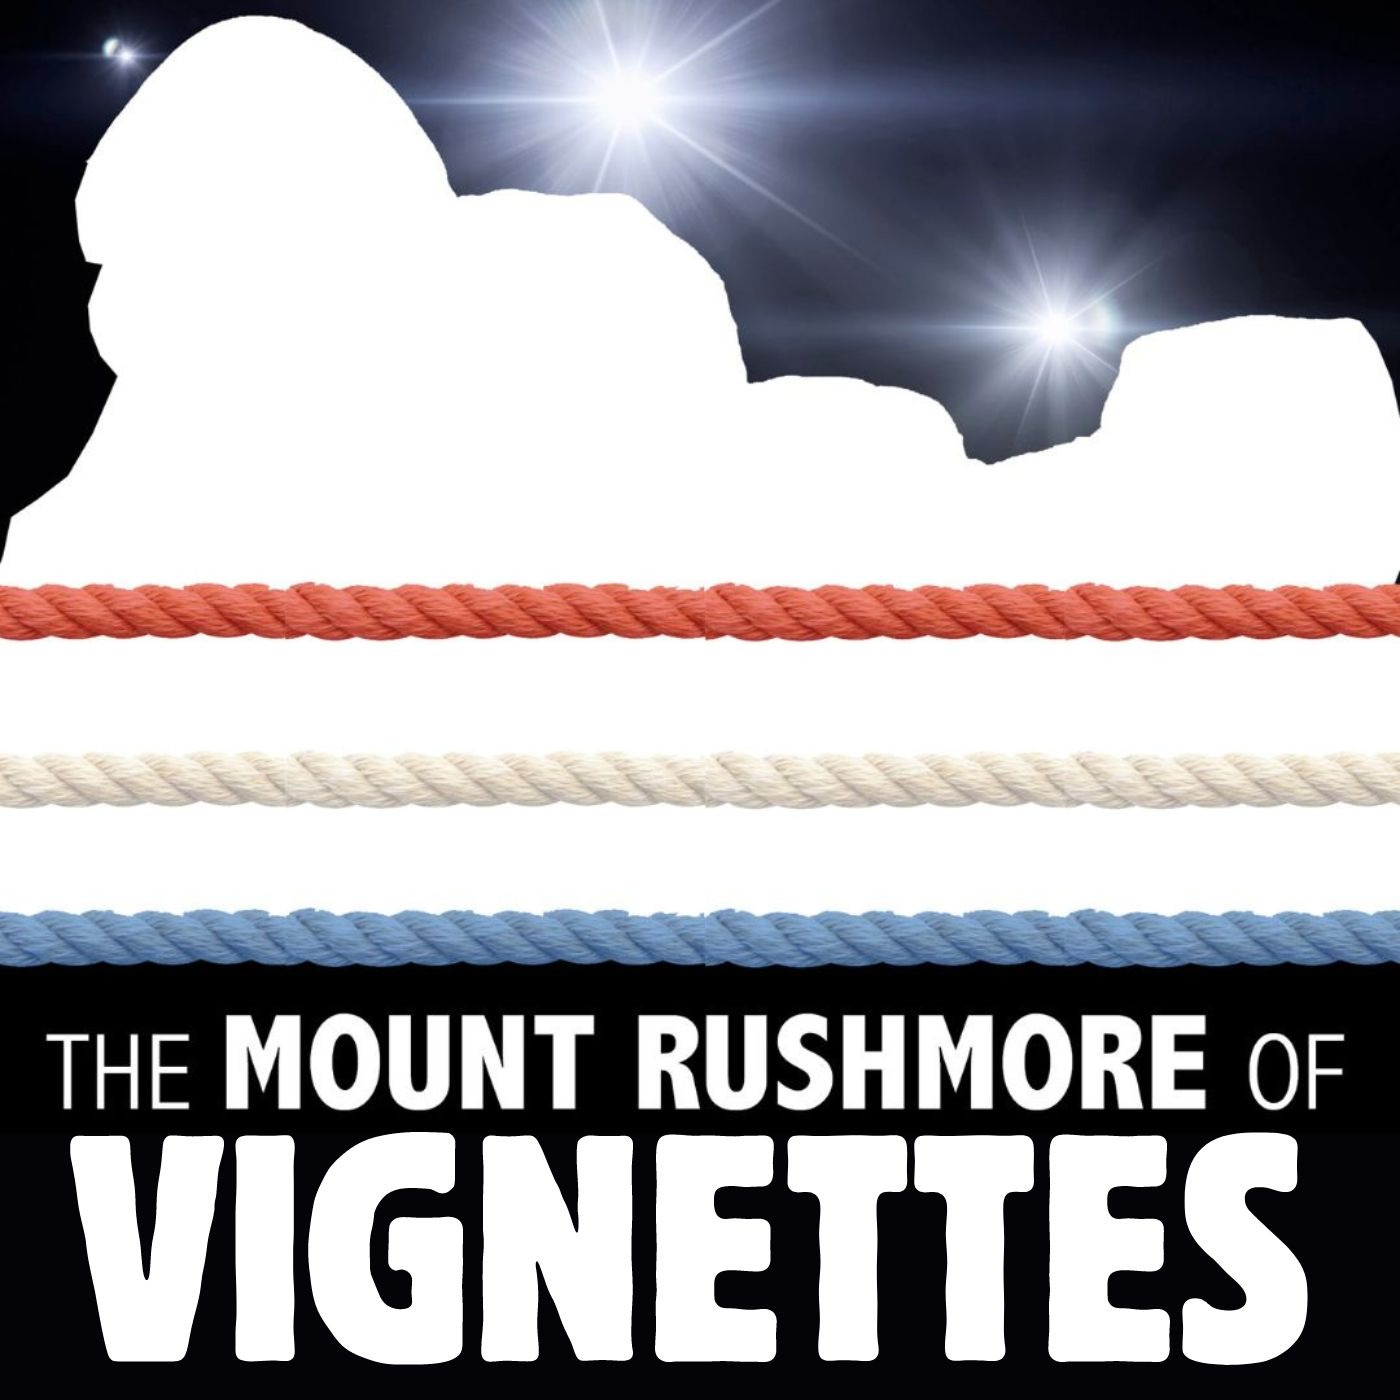 005 The Mount Rushmore of Vignettes